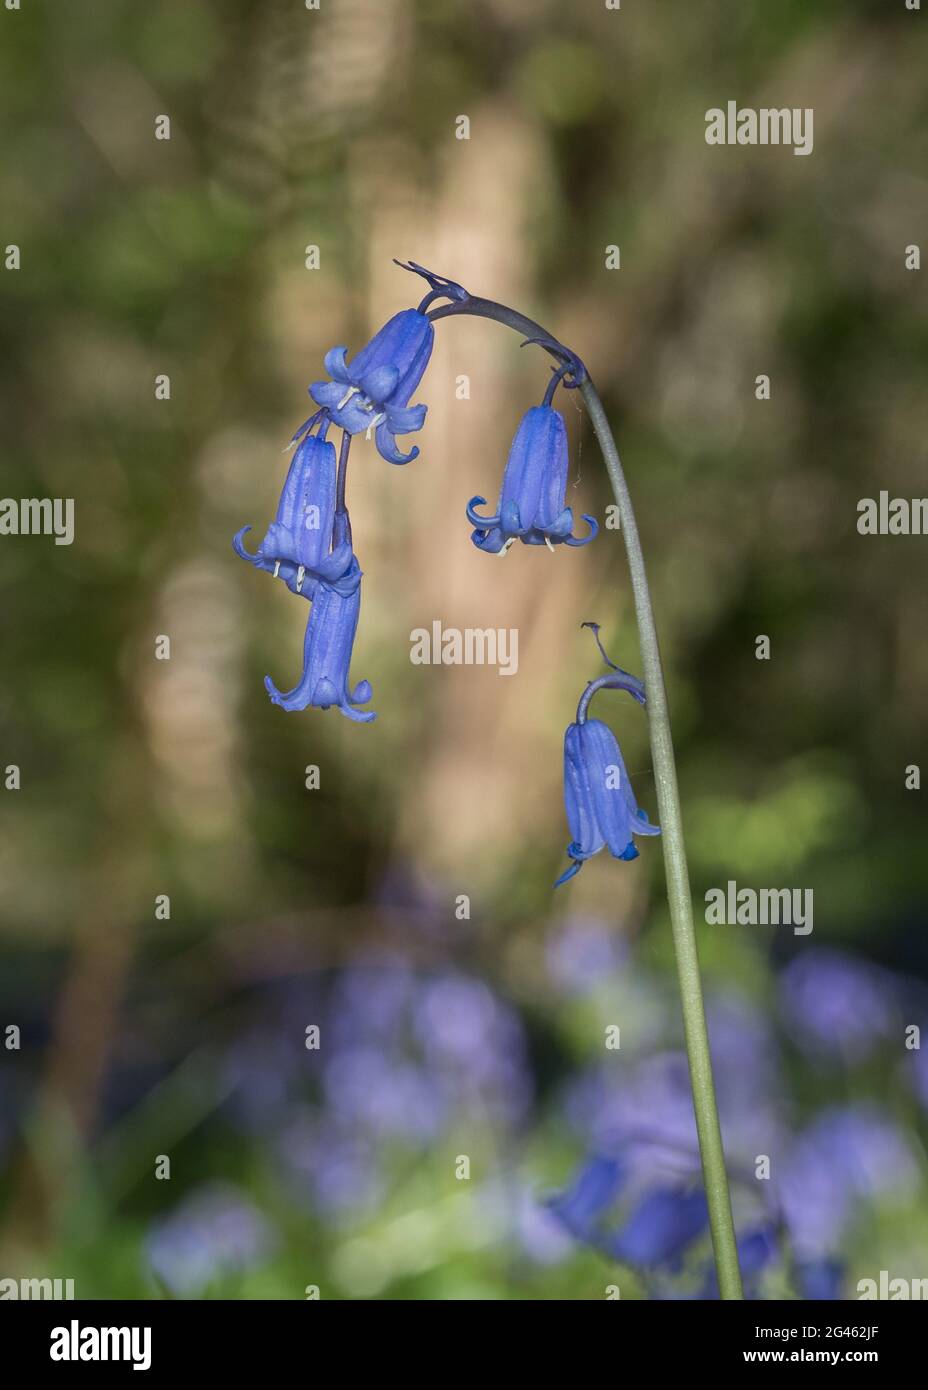 a single  isolated stem close up detail arching English Bluebells at ground level profile against bright bokeh background Stock Photo